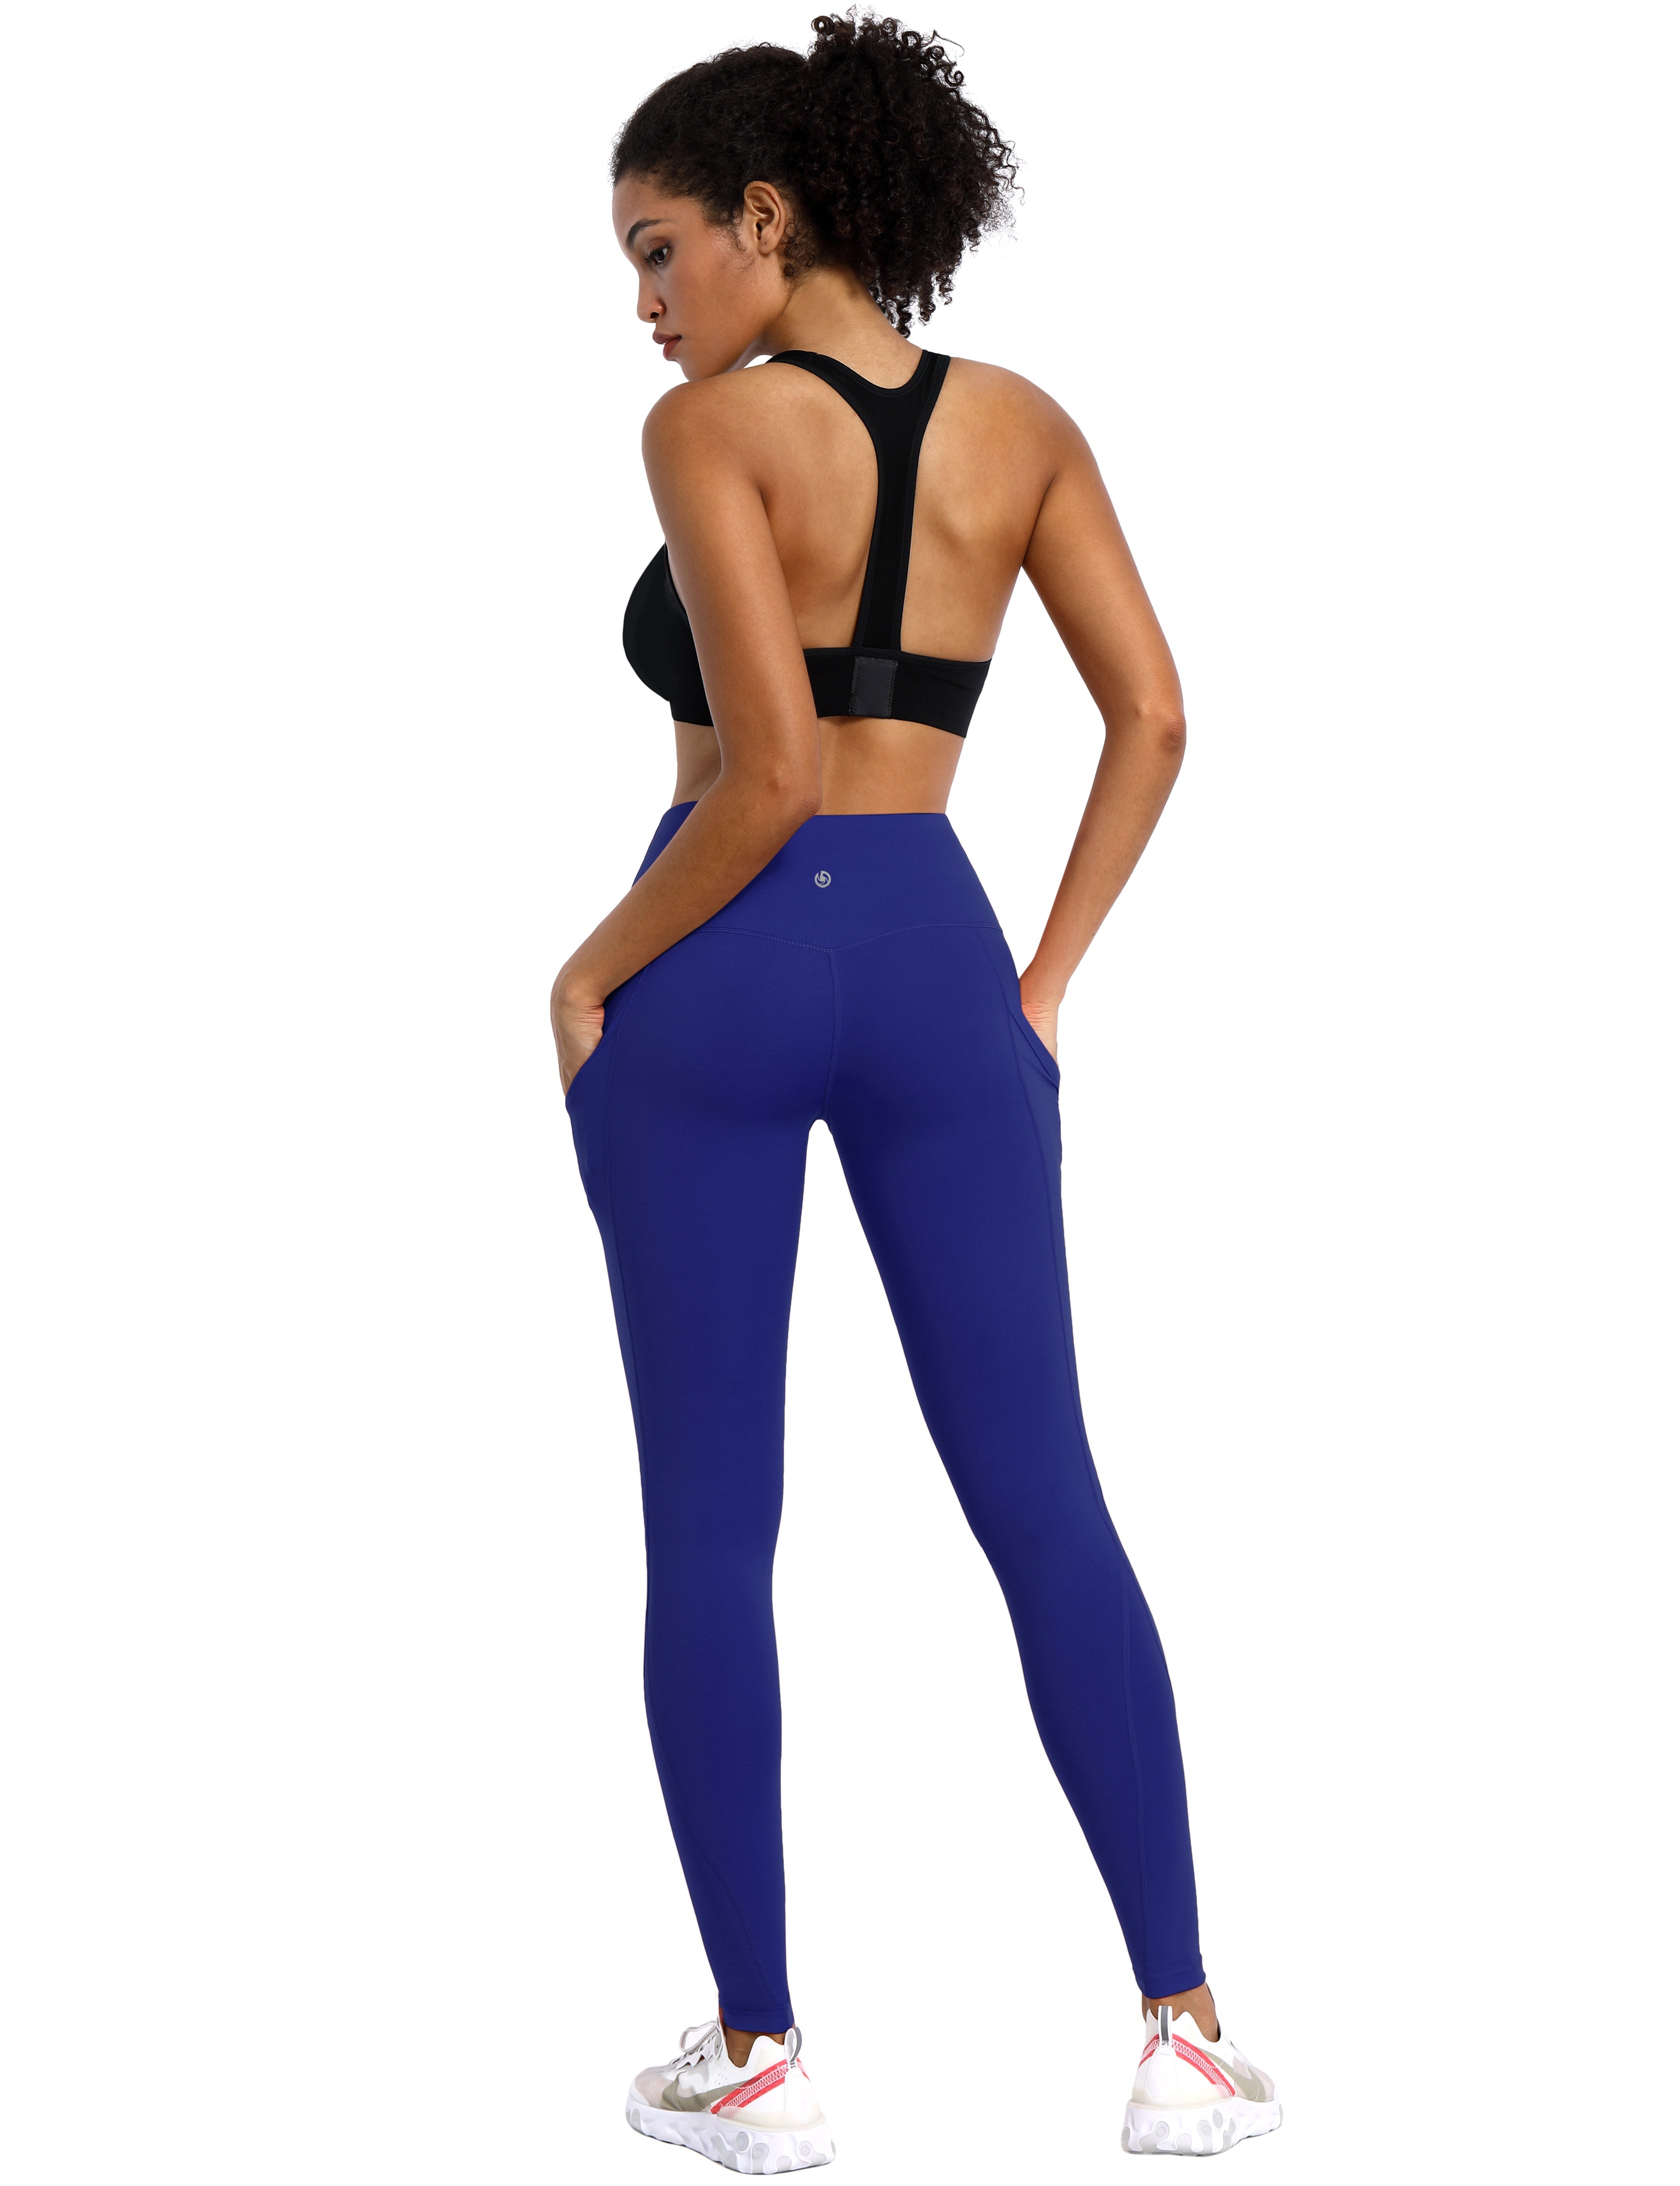 High Waist Side Pockets Biking Pants navy 75% Nylon, 25% Spandex Fabric doesn't attract lint easily 4-way stretch No see-through Moisture-wicking Tummy control Inner pocket